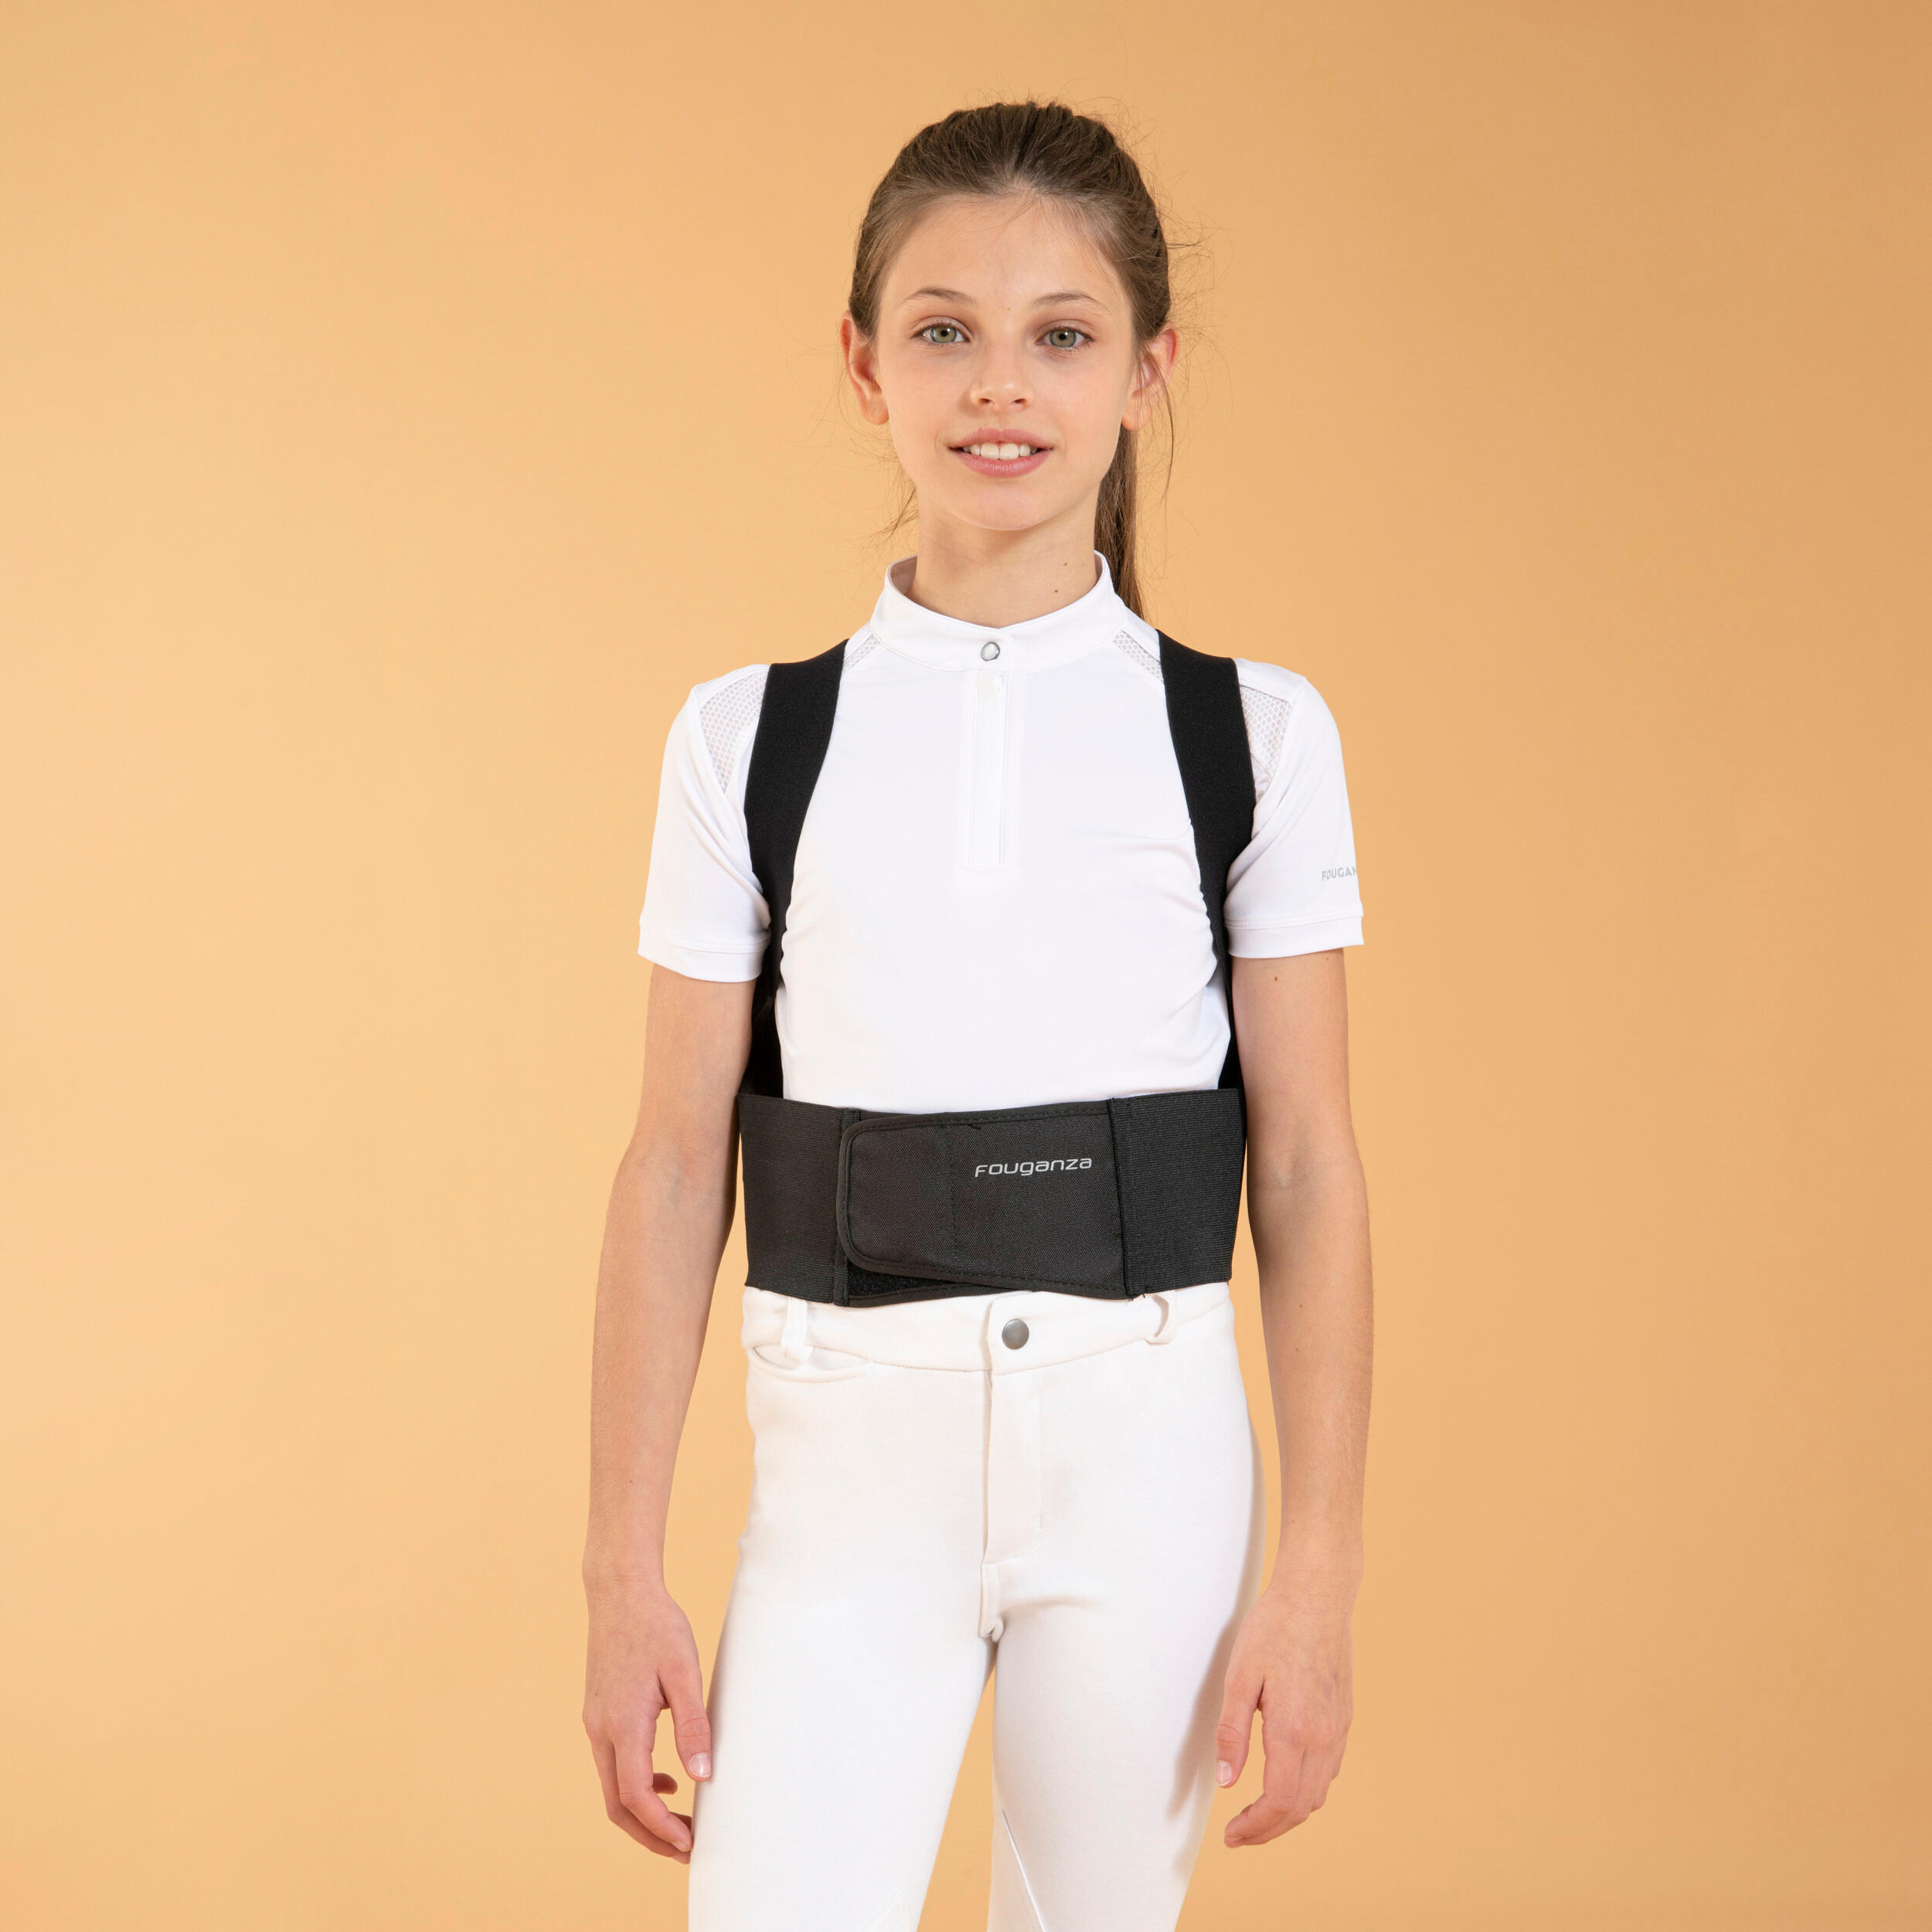 Kids' Horse Riding Back Protector Safety - Black 4/4